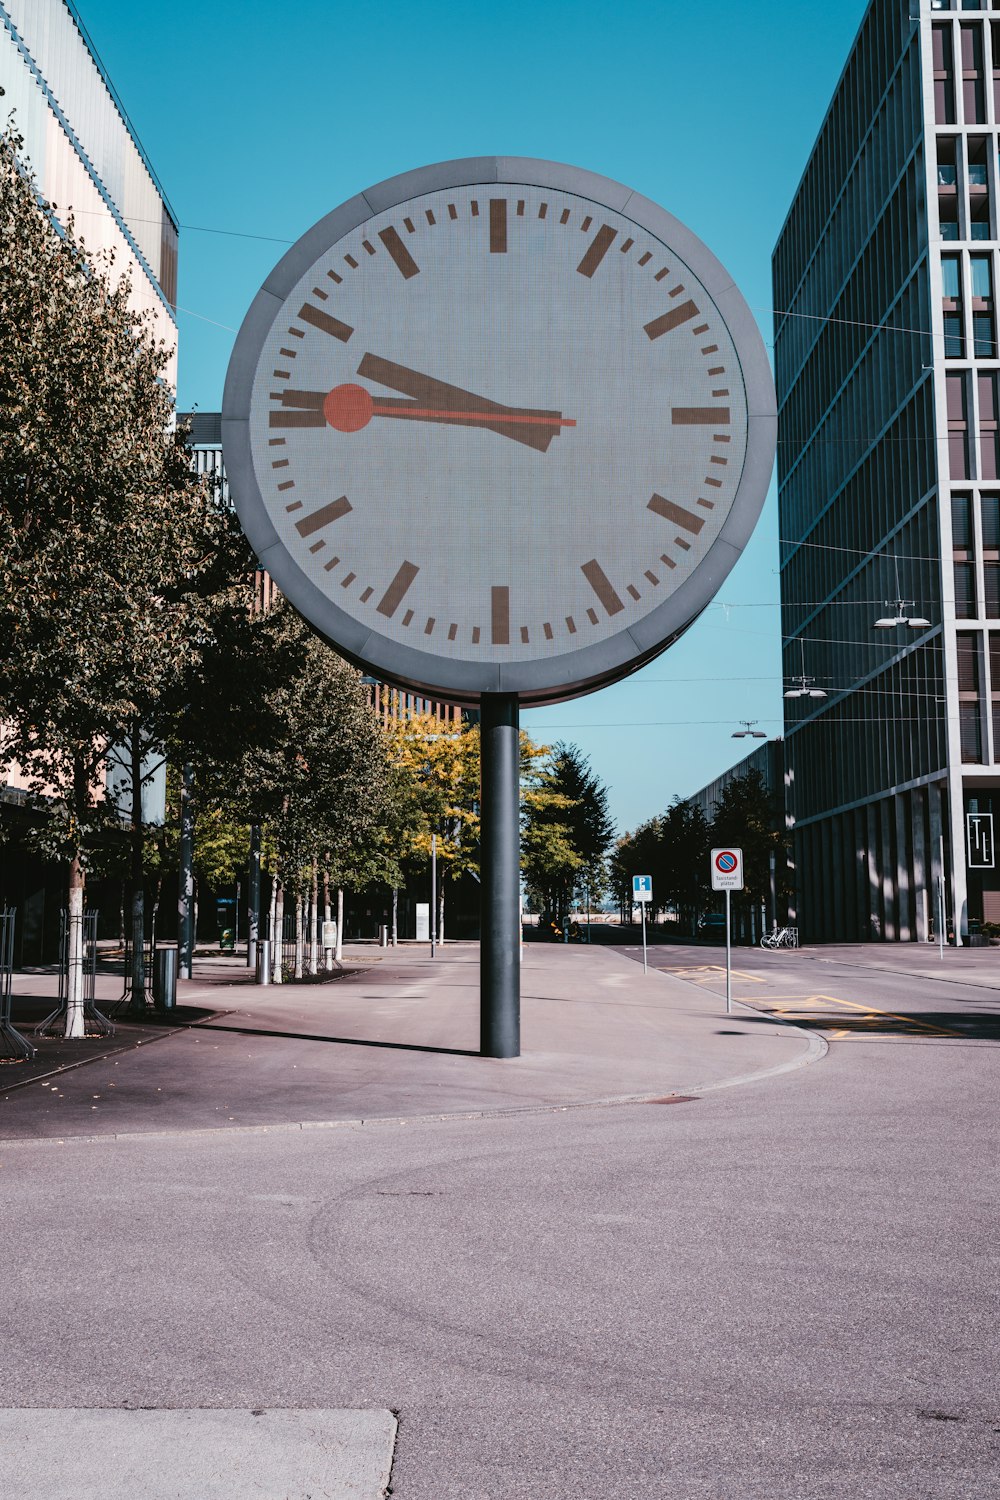 a large clock on a pole in the middle of a street